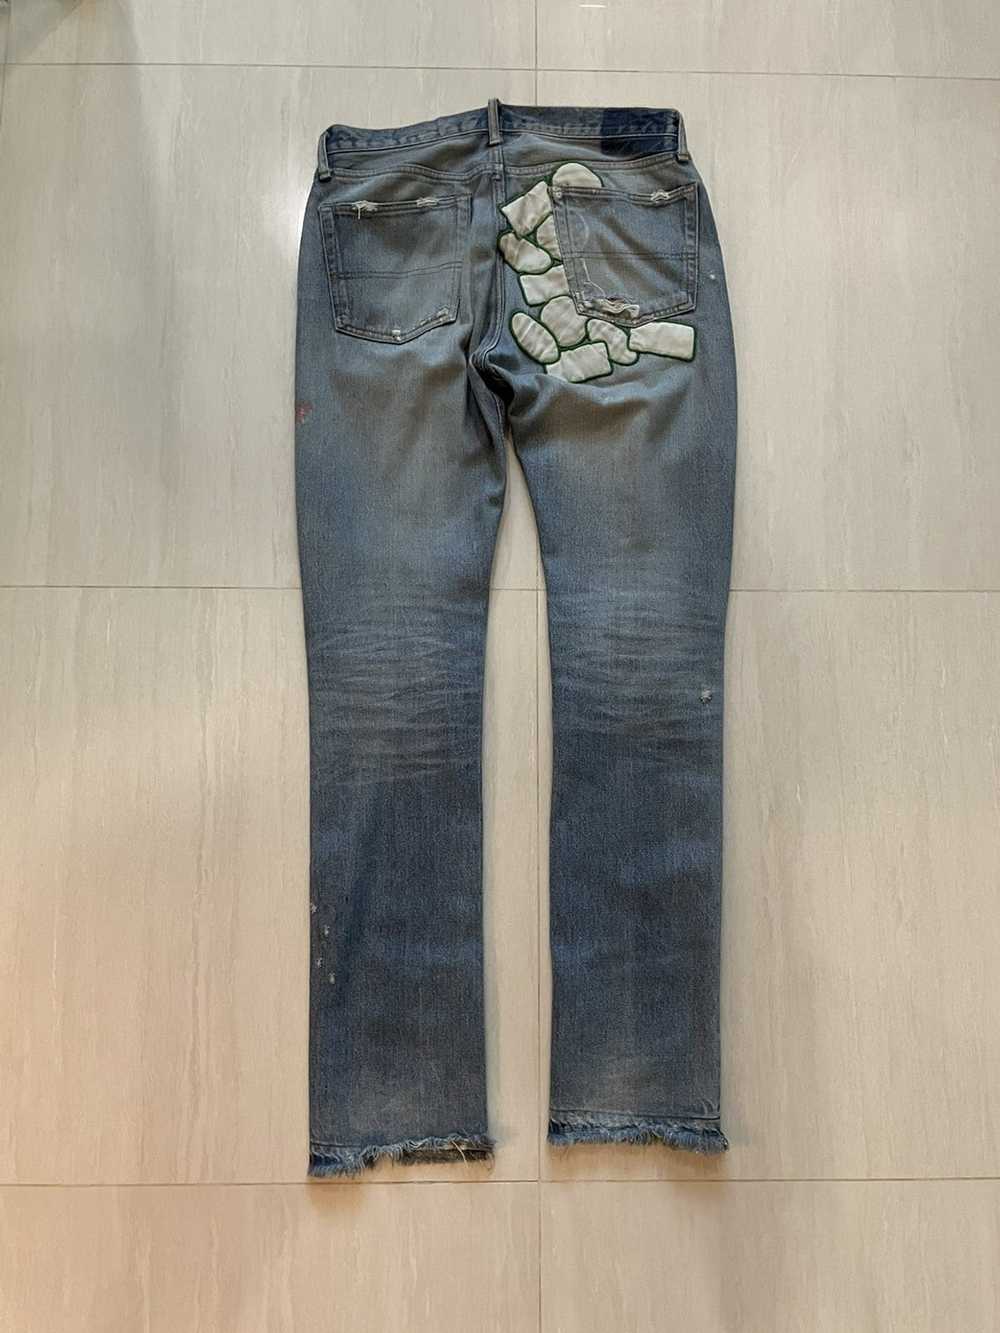 Undercover Undercover SS05 But Beautiful 52 Denim - image 2